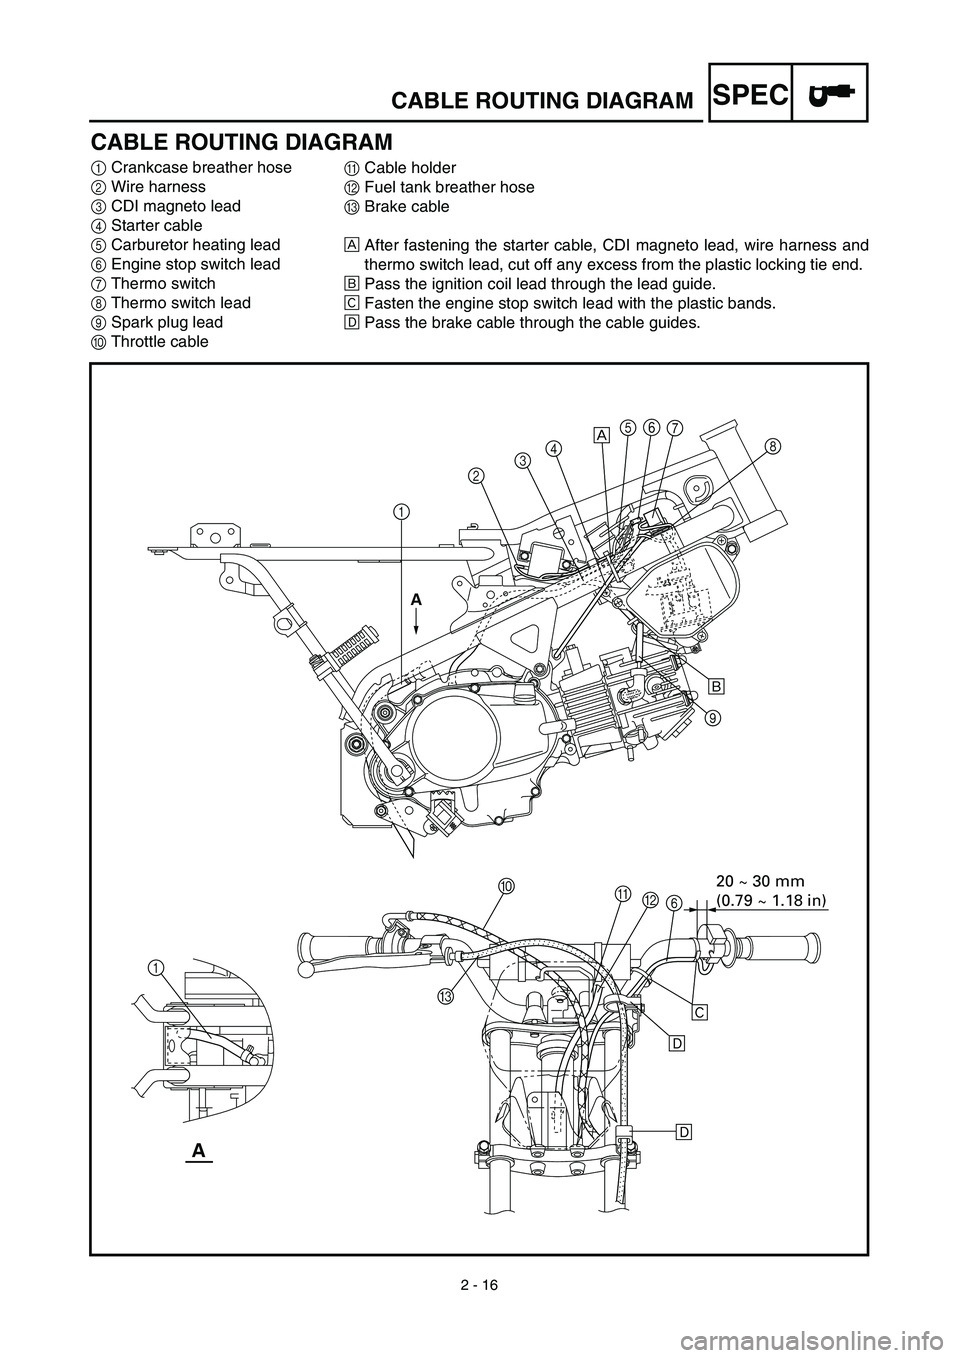 YAMAHA TTR90 2003  Notices Demploi (in French) 2 - 16
SPECCABLE ROUTING DIAGRAM
CABLE ROUTING DIAGRAM
1Crankcase breather hose
2Wire harness
3CDI magneto lead
4Starter cable
5Carburetor heating lead
6Engine stop switch lead
7Thermo switch
8Thermo 